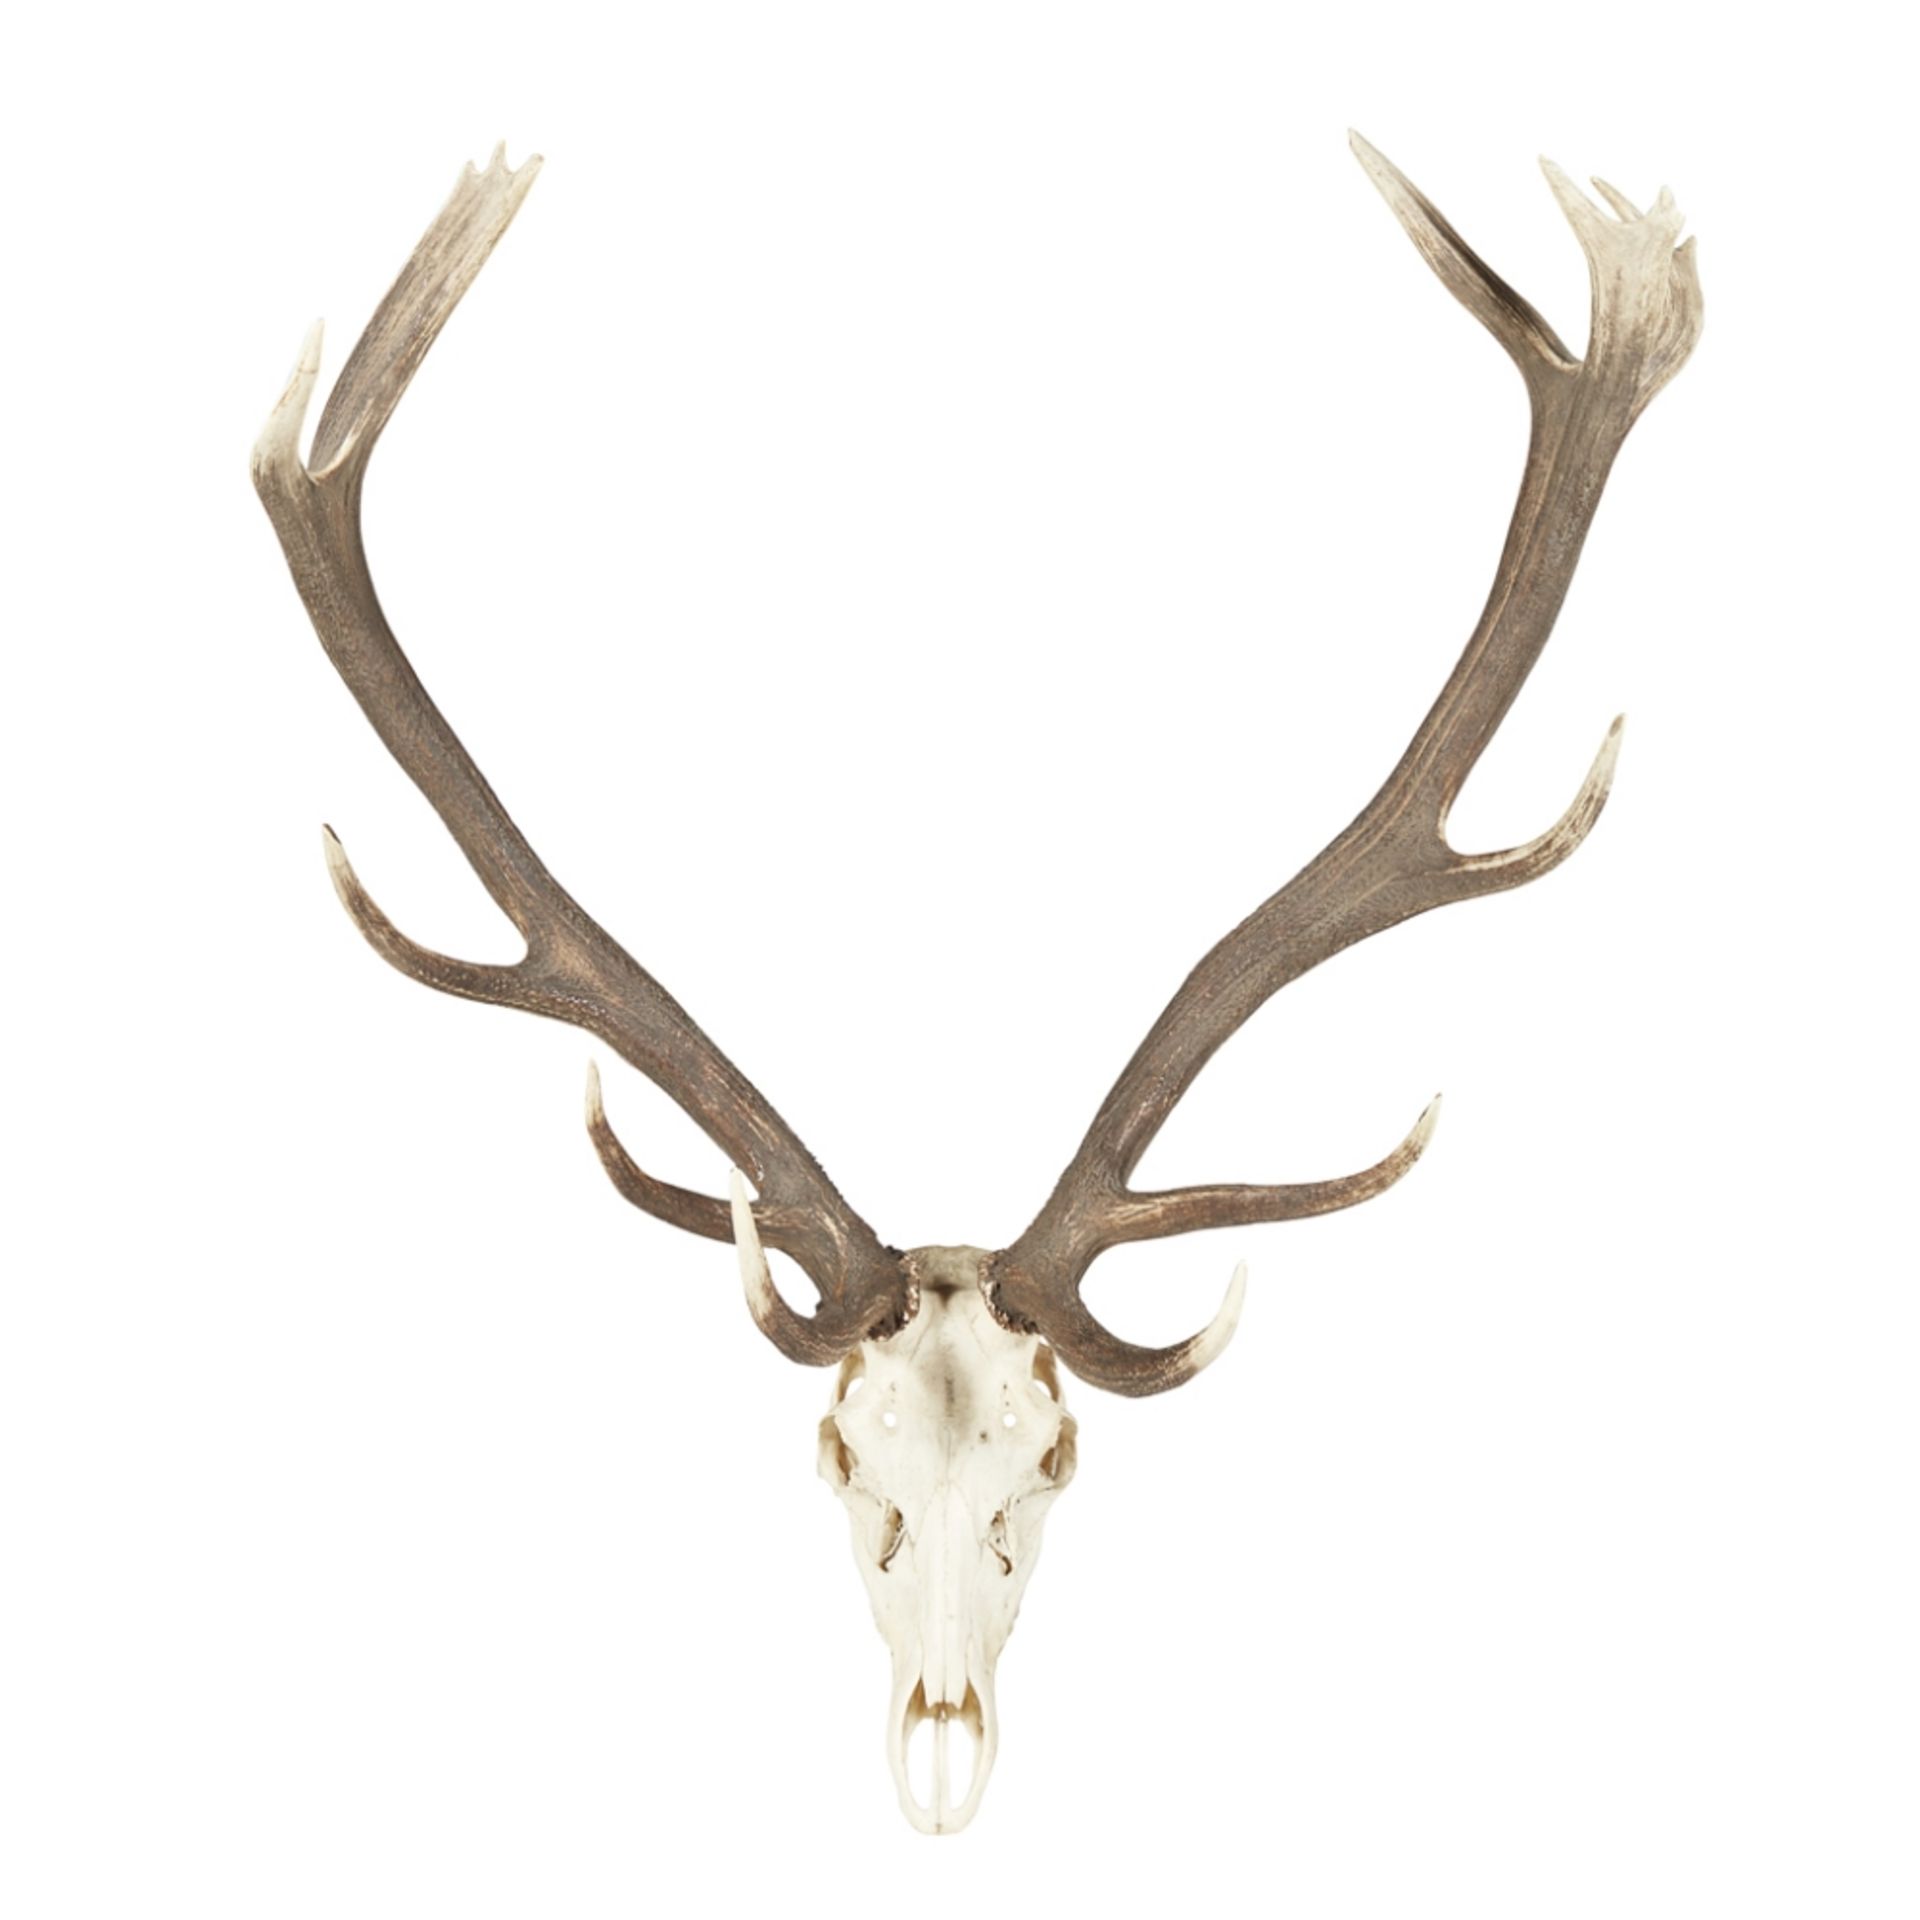 SET OF EUROPEAN RED DEER STAG ANTLERSwith fifteen points, mounted to a stripped skull100cm wide